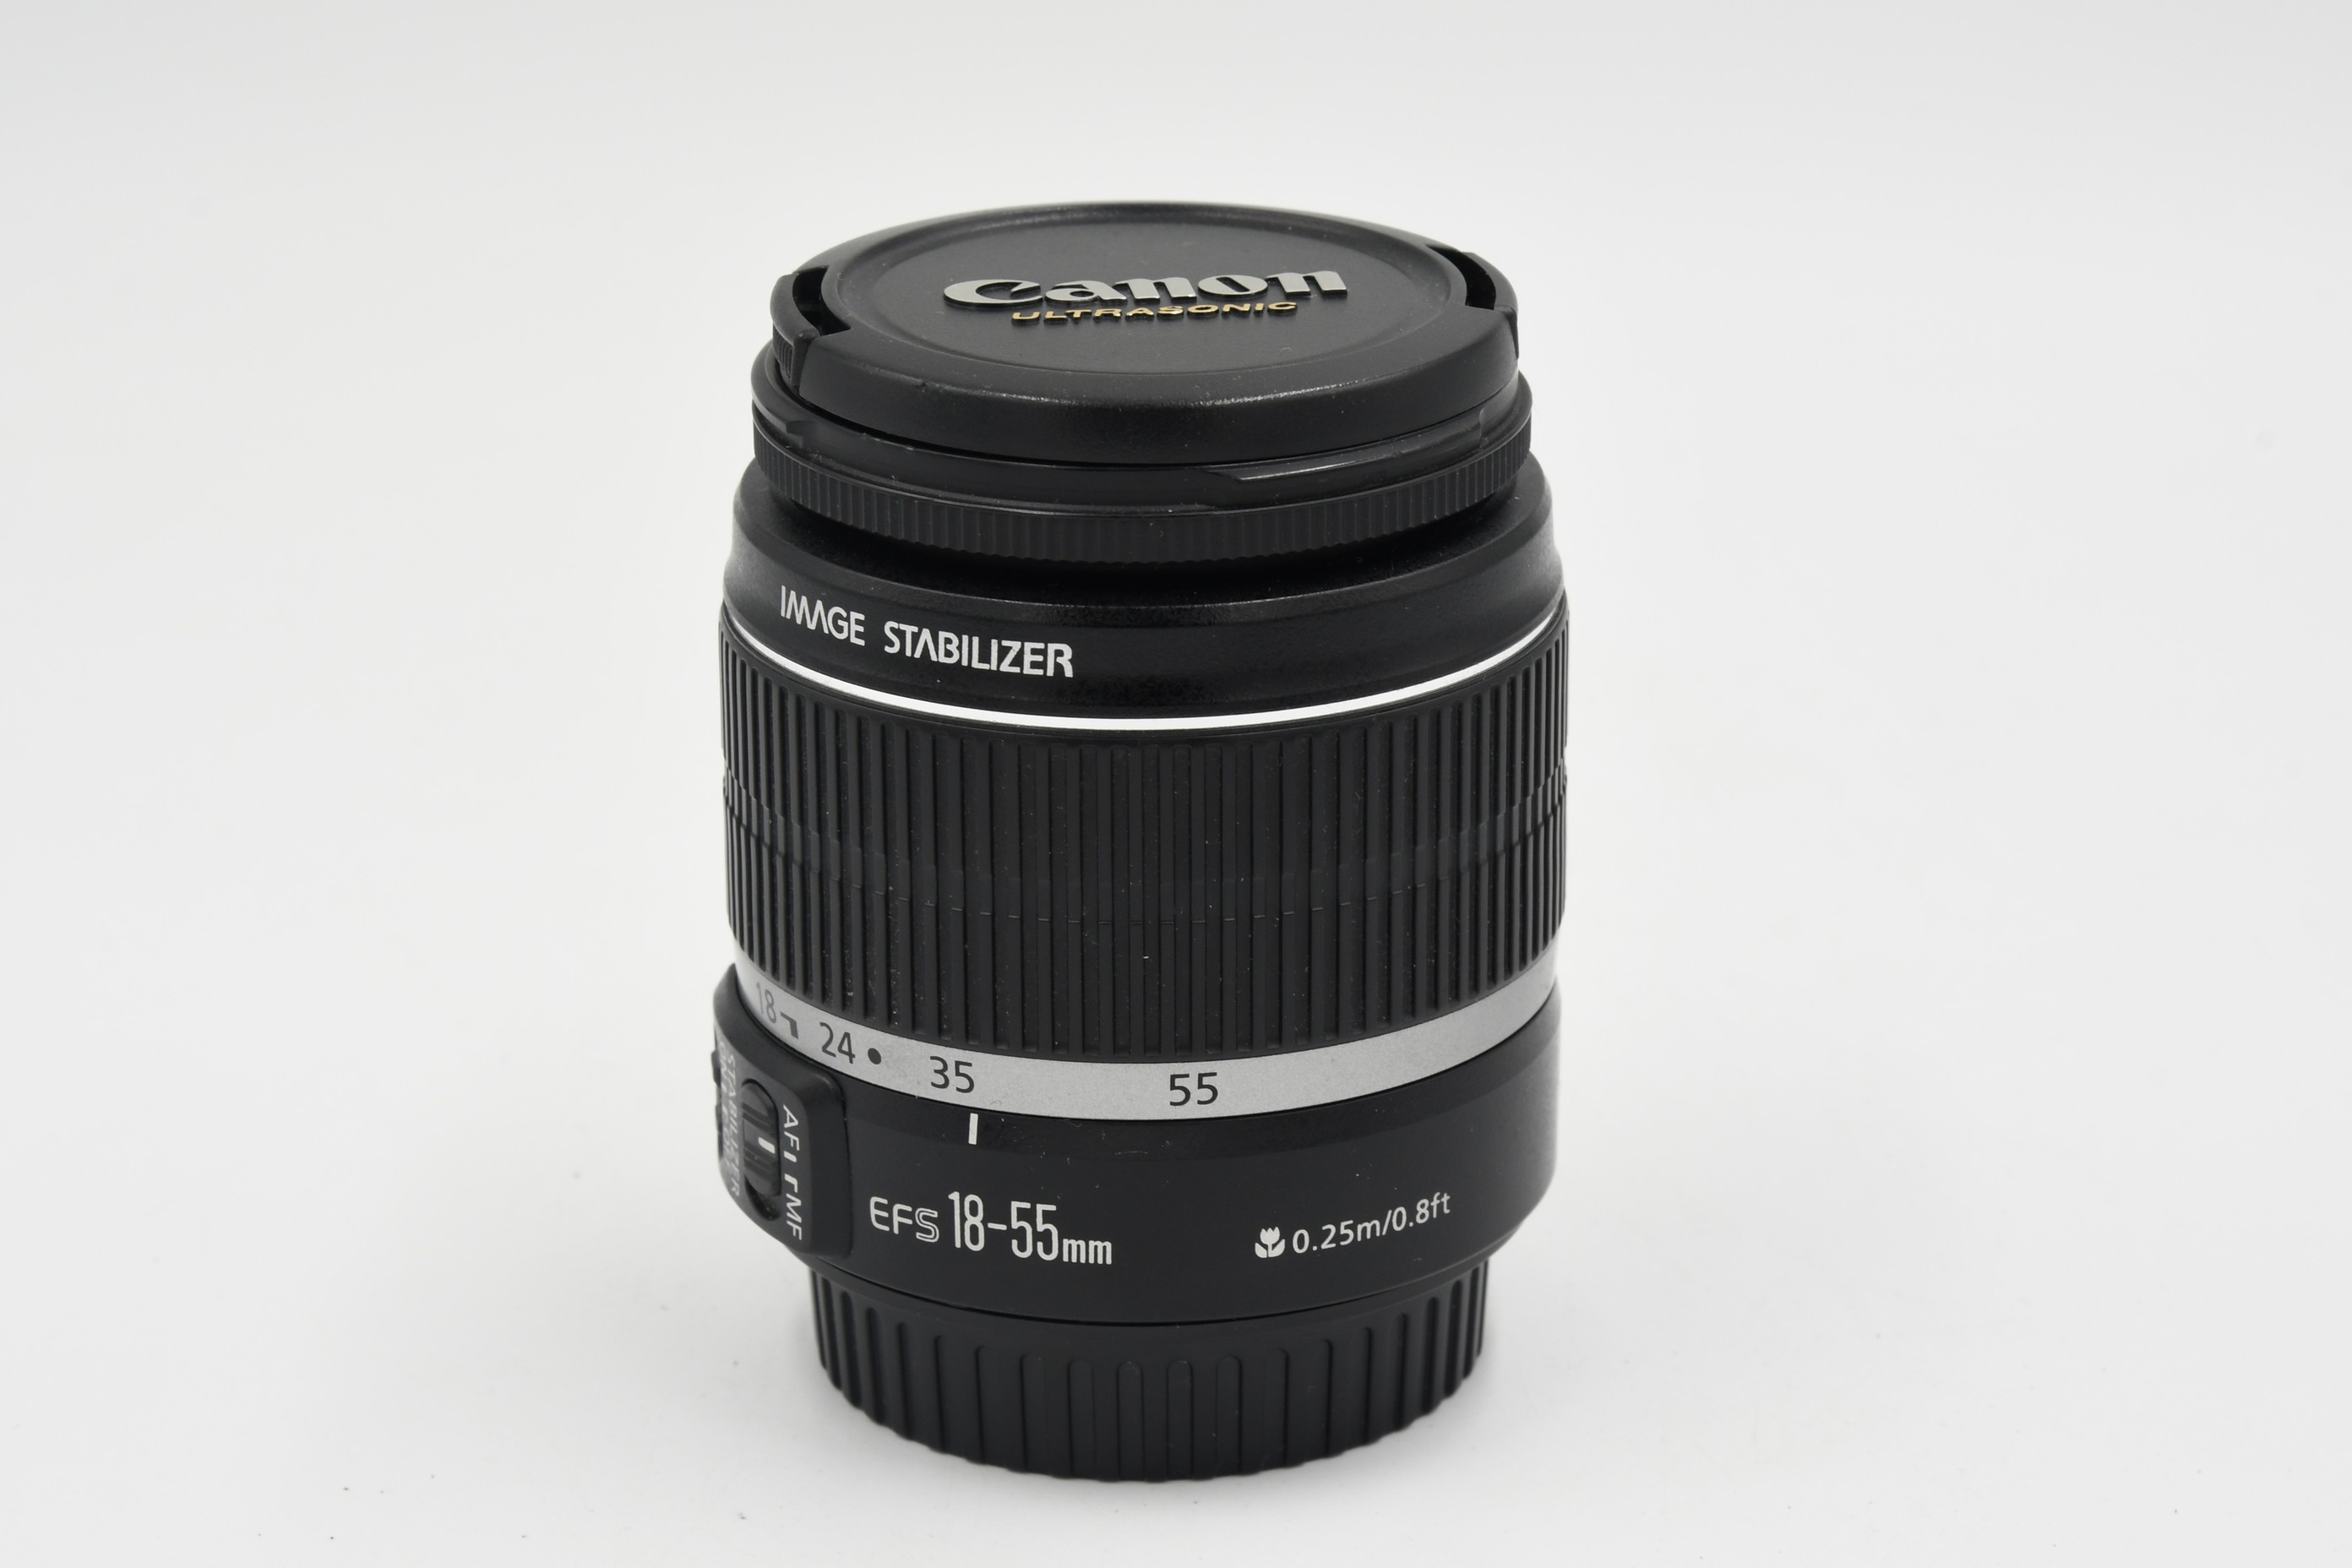  Canon EF-S 18-55mm f/3.5-5.6 IS ( 5)